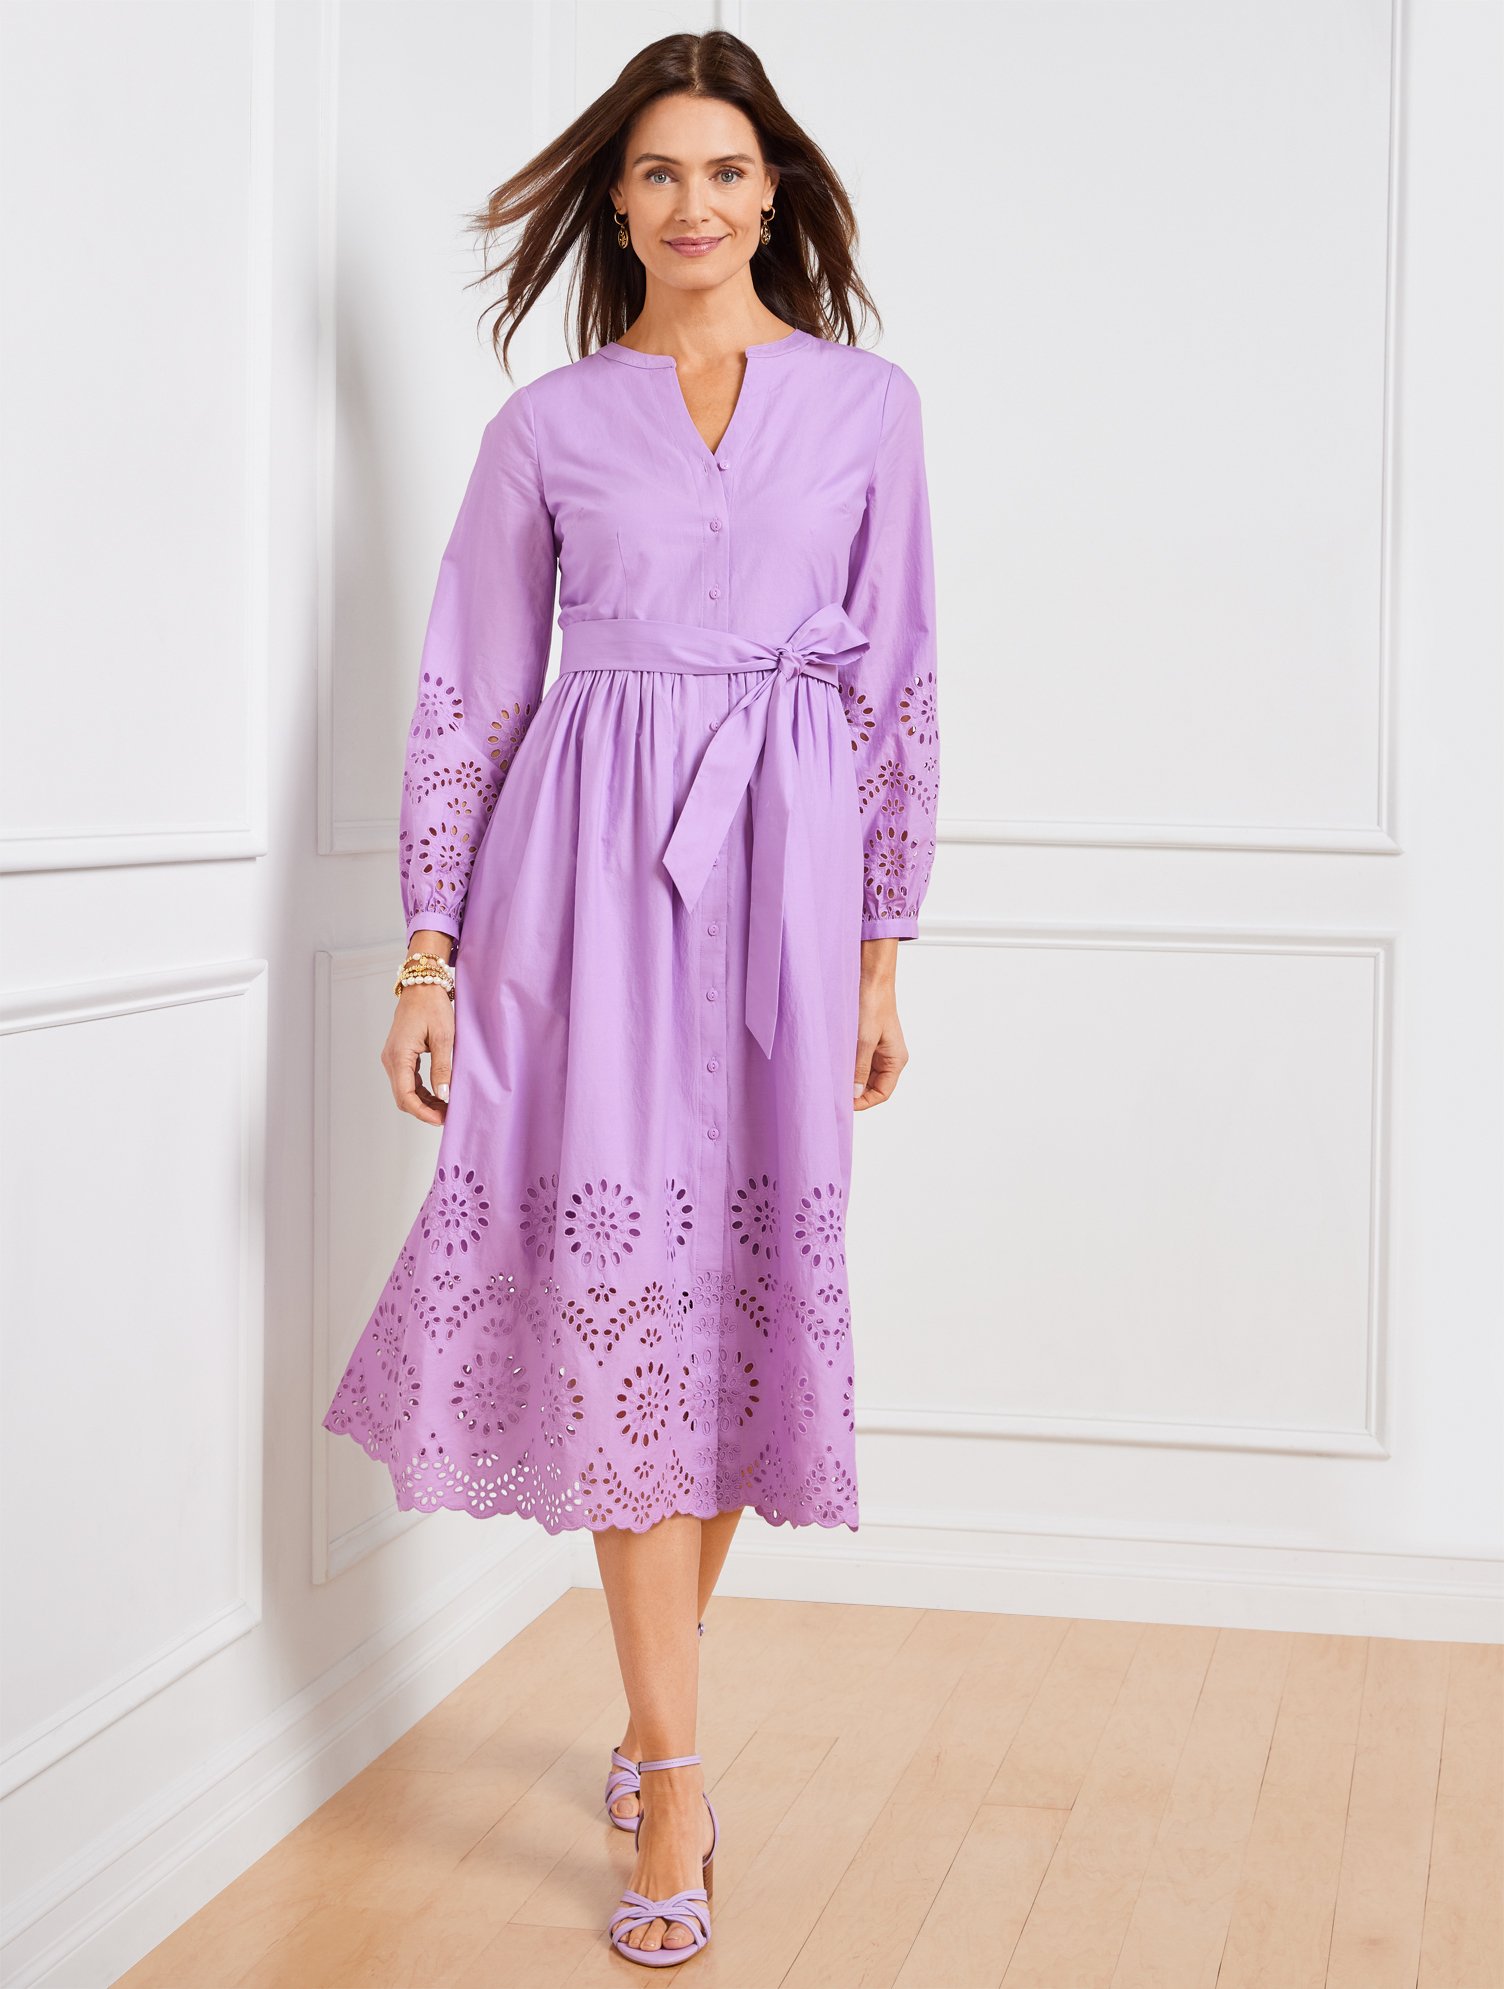 Talbots Placed Eyelet Fit & Flare Shirtdress - Wisteria Purple - 22 - 100% Cotton